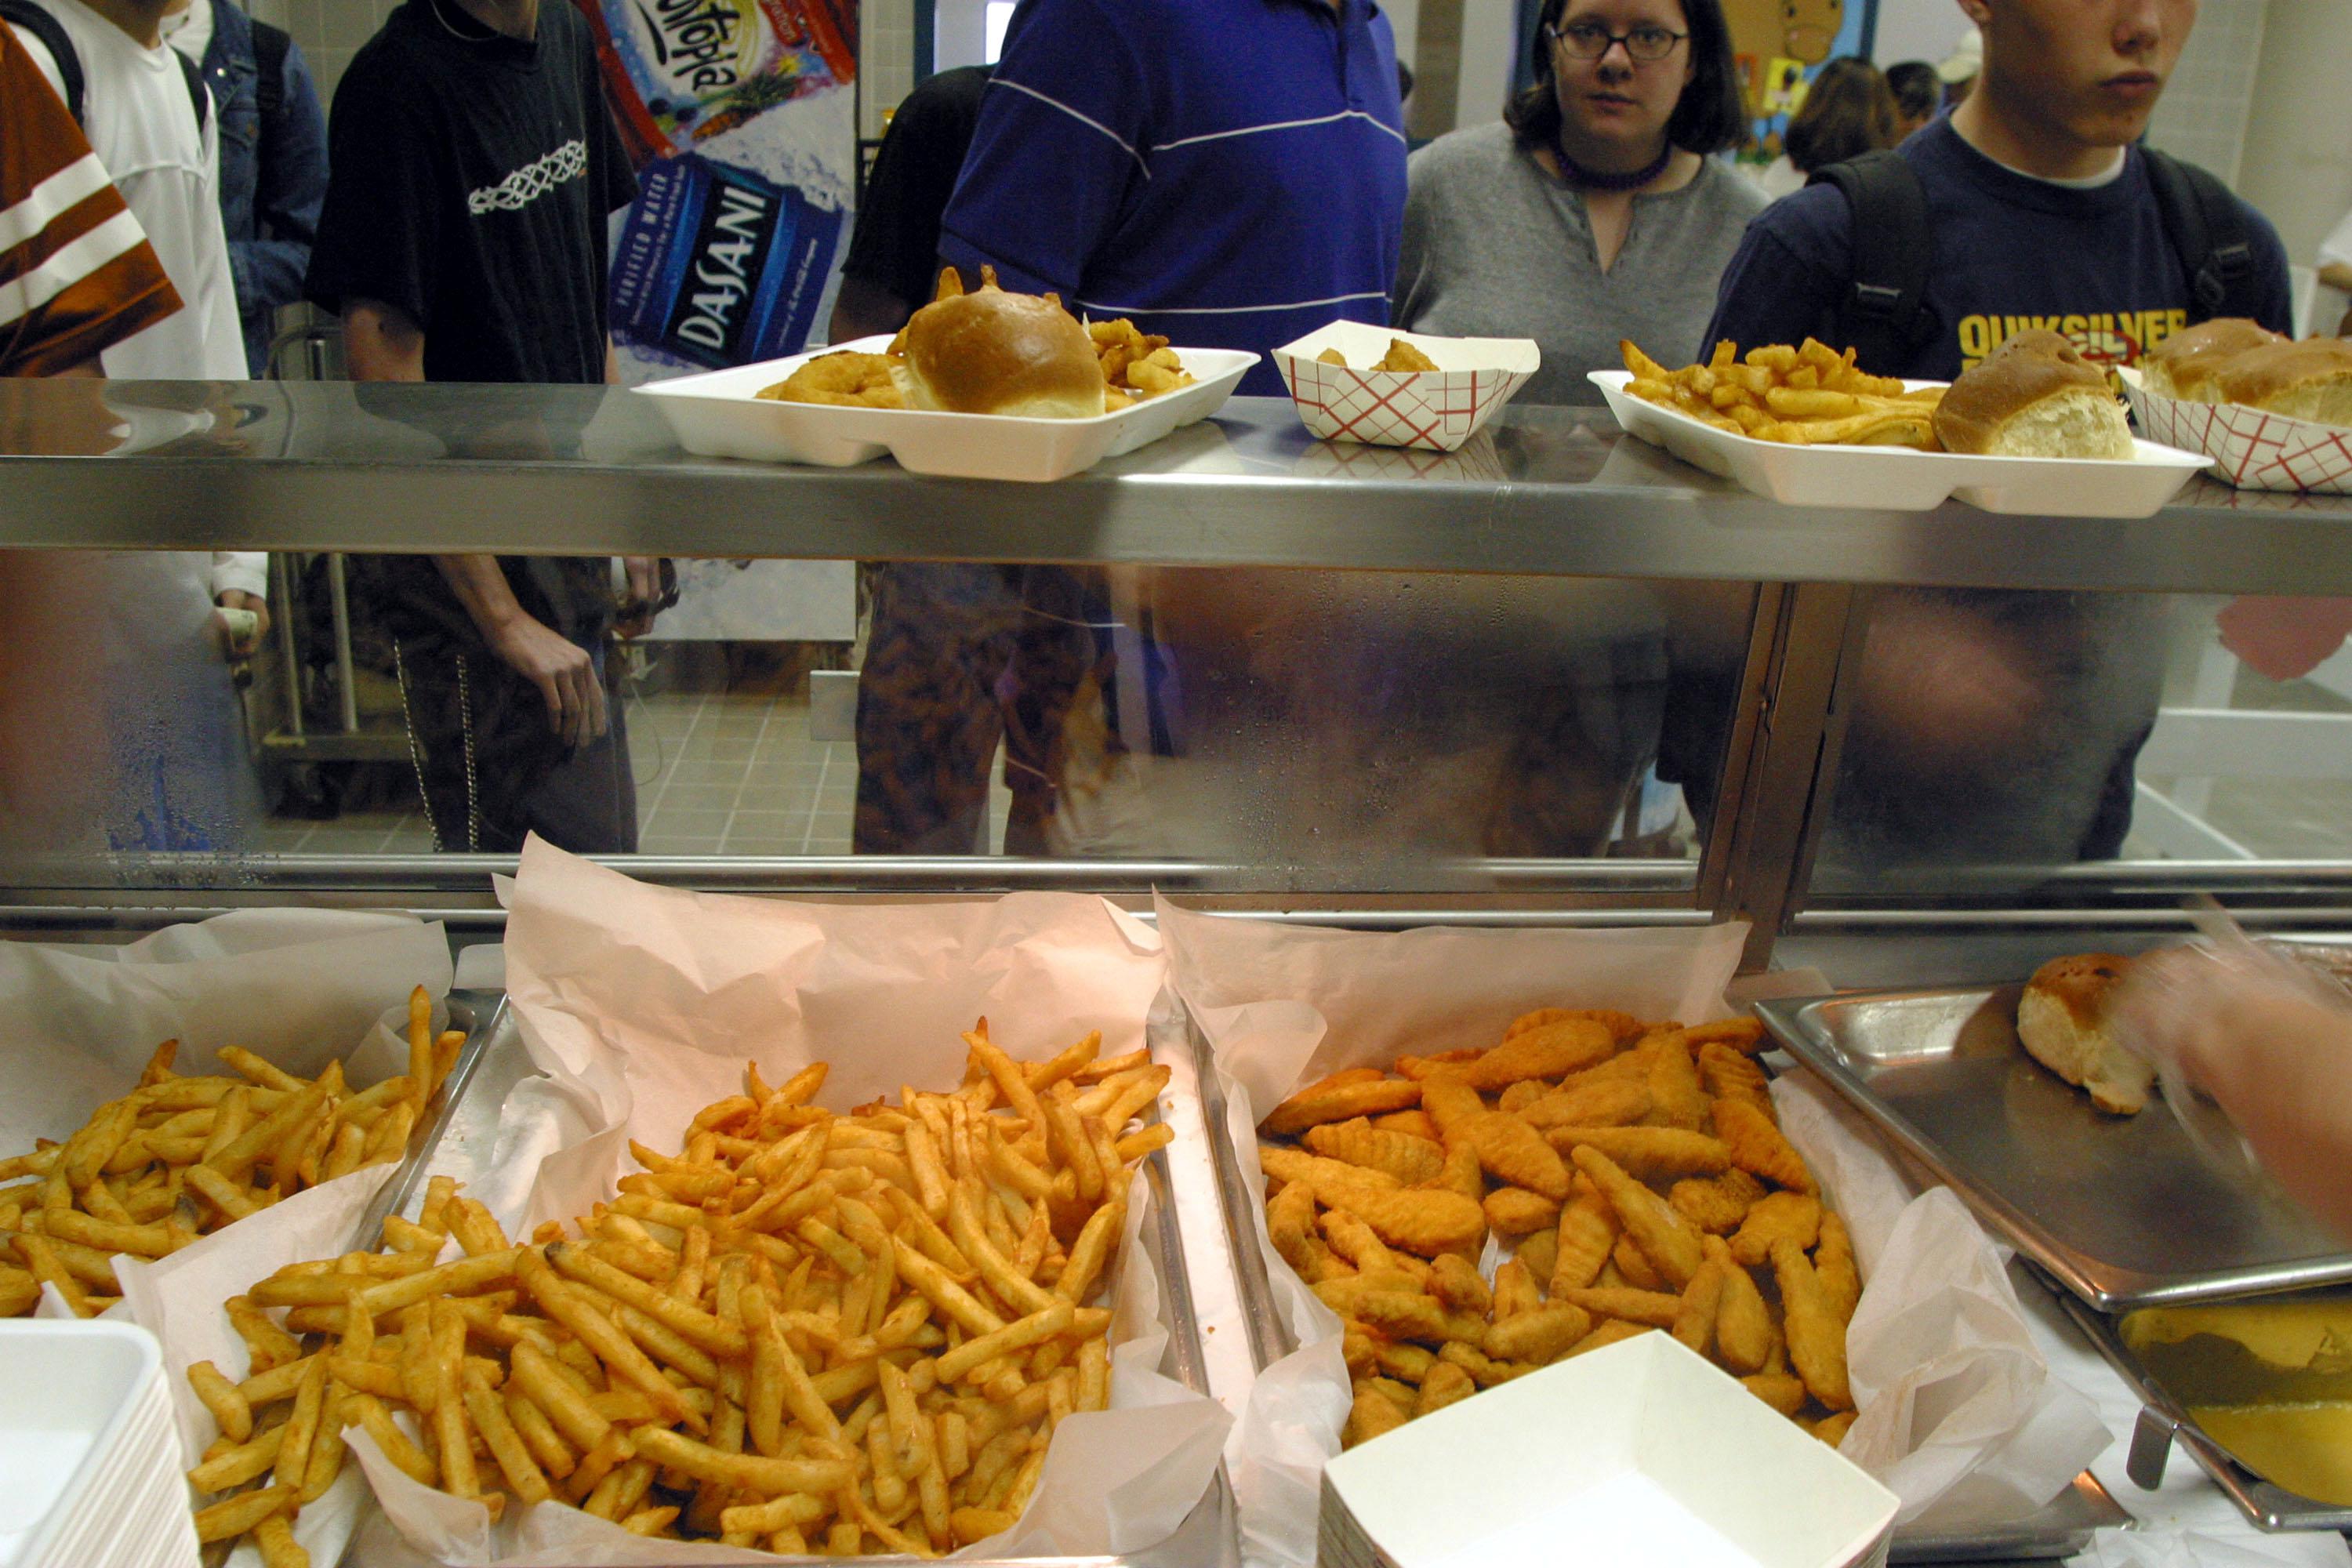 Students line up to receive food during lunch in the cafeteria at Bowie High School March 11, 2004 in Austin, Texas.